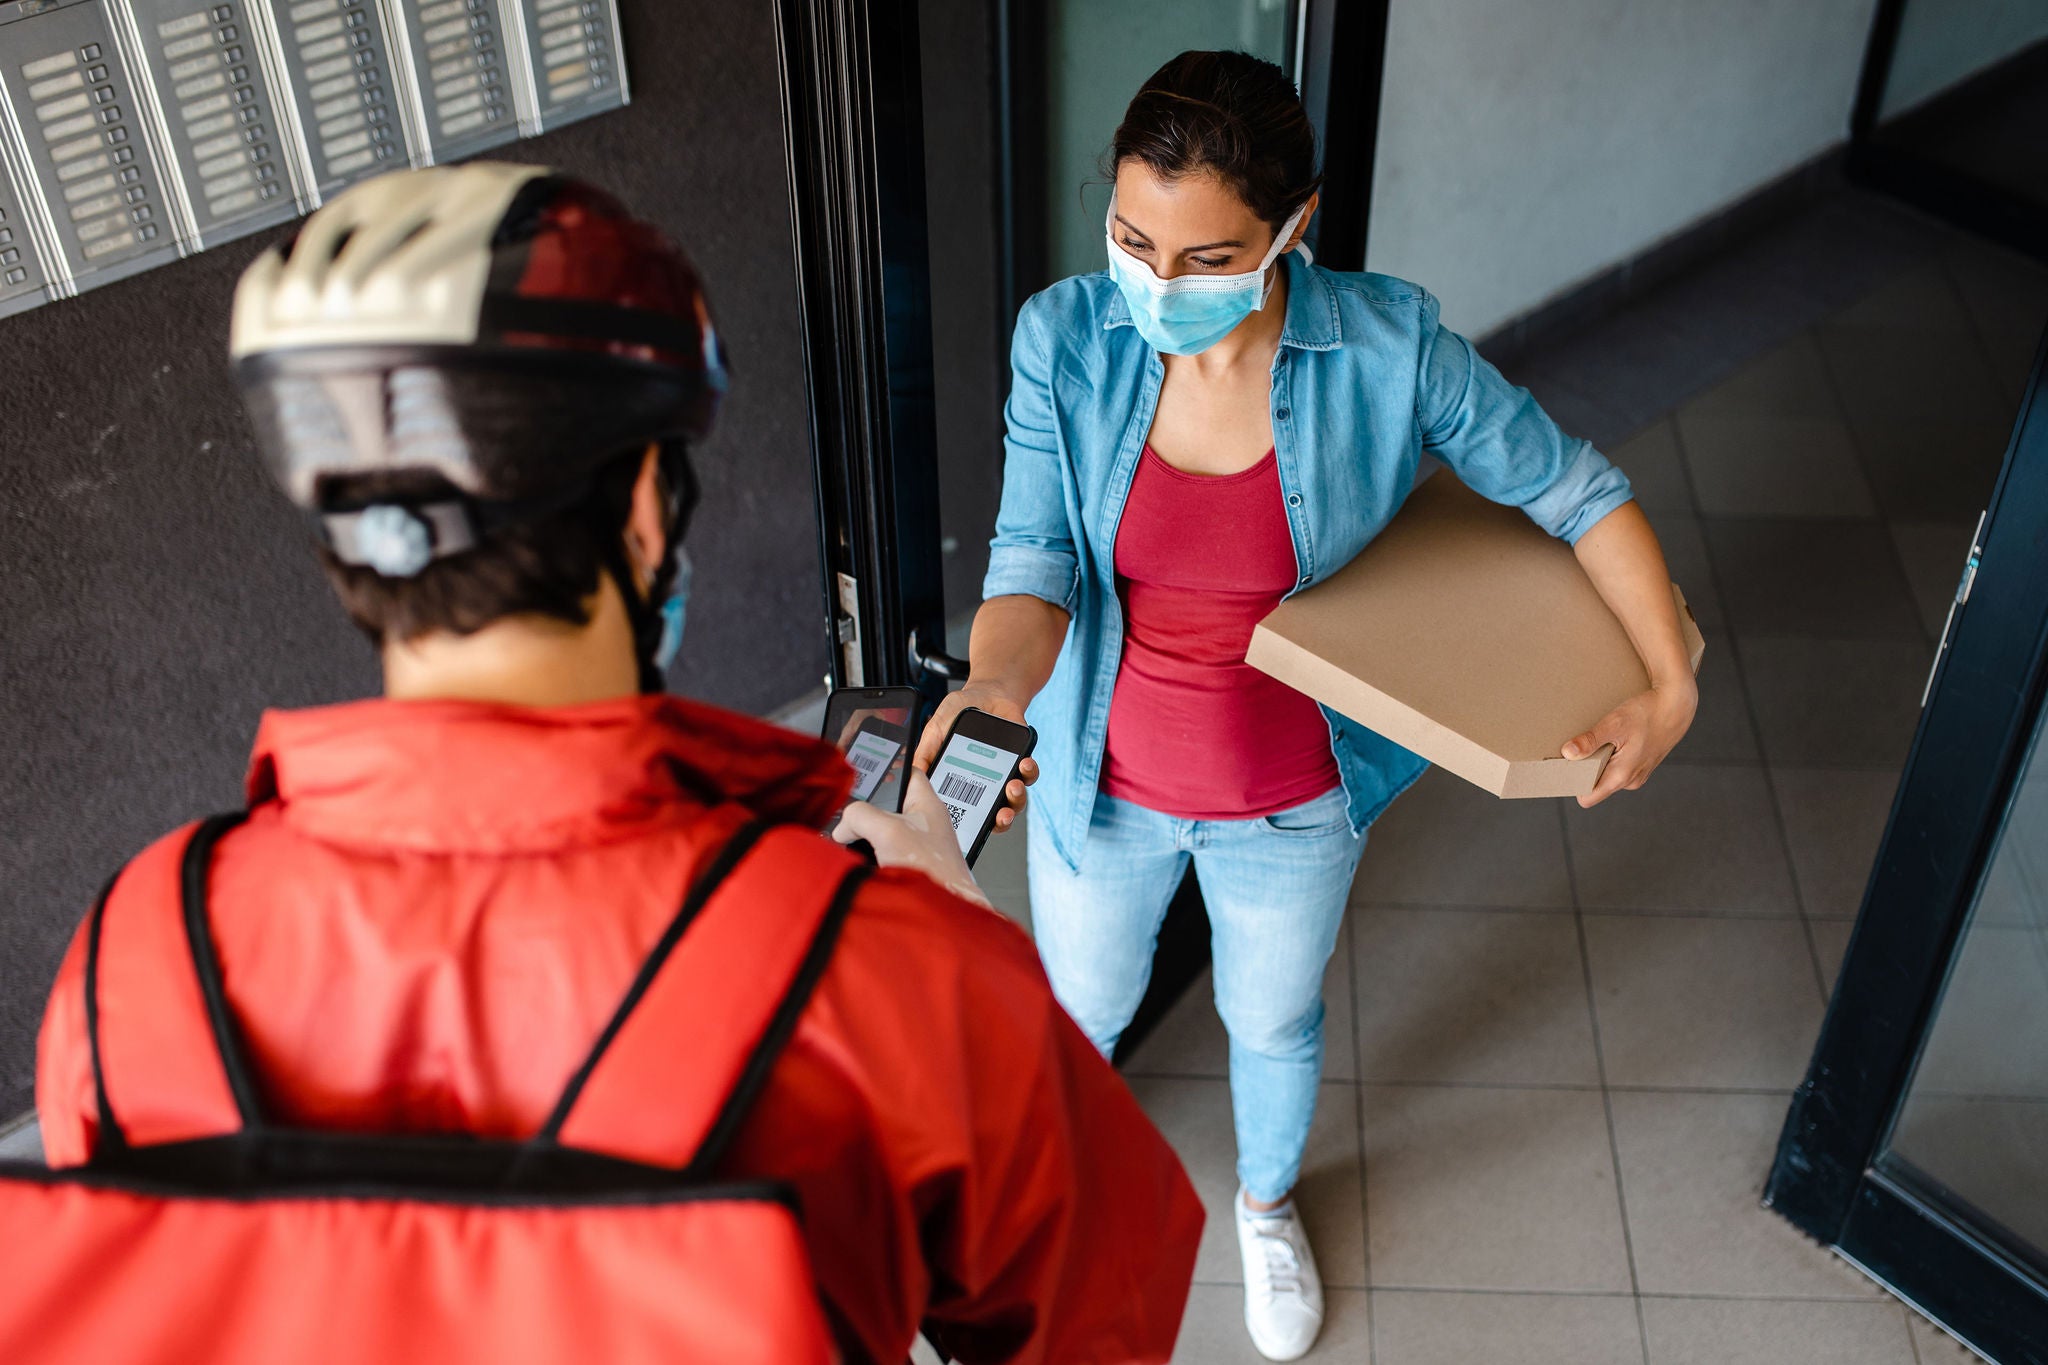 Delivery guy deliver a pizza to a customer in front of the residential building, and she paying via mobile app so they avoid a contact during corona virus pandemic